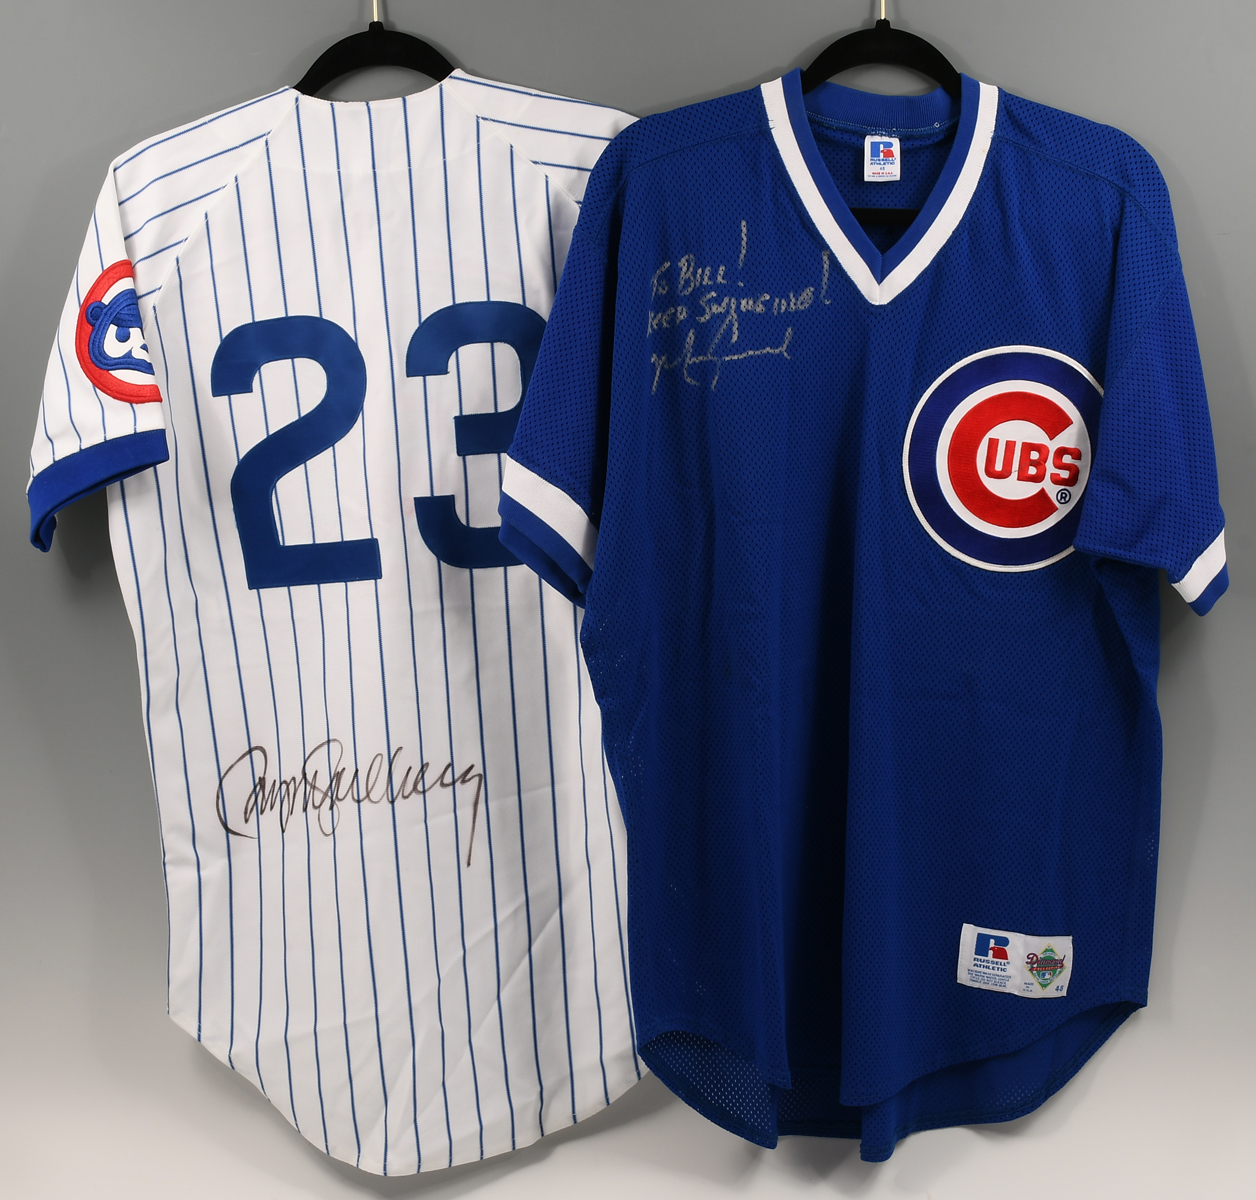 TWO SIGNED CHICAGO CUBS JERSEYS: